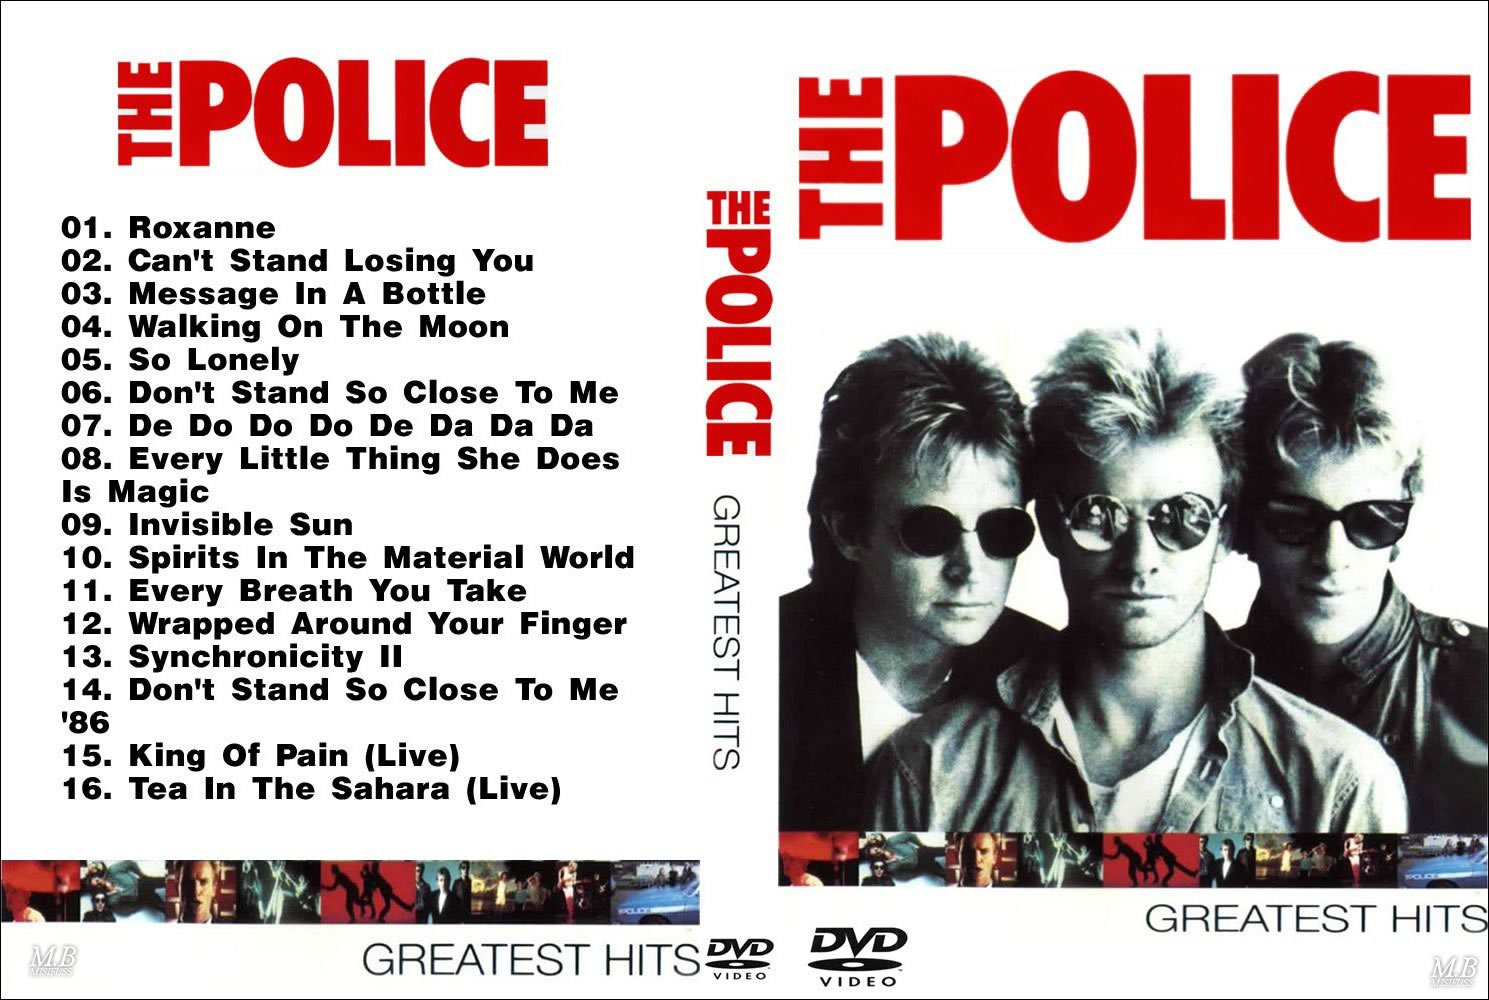 The police have arrived. The Police Greatest Hits 1992. Police "Greatest Hits". The Police альбомы. Sting the Police.